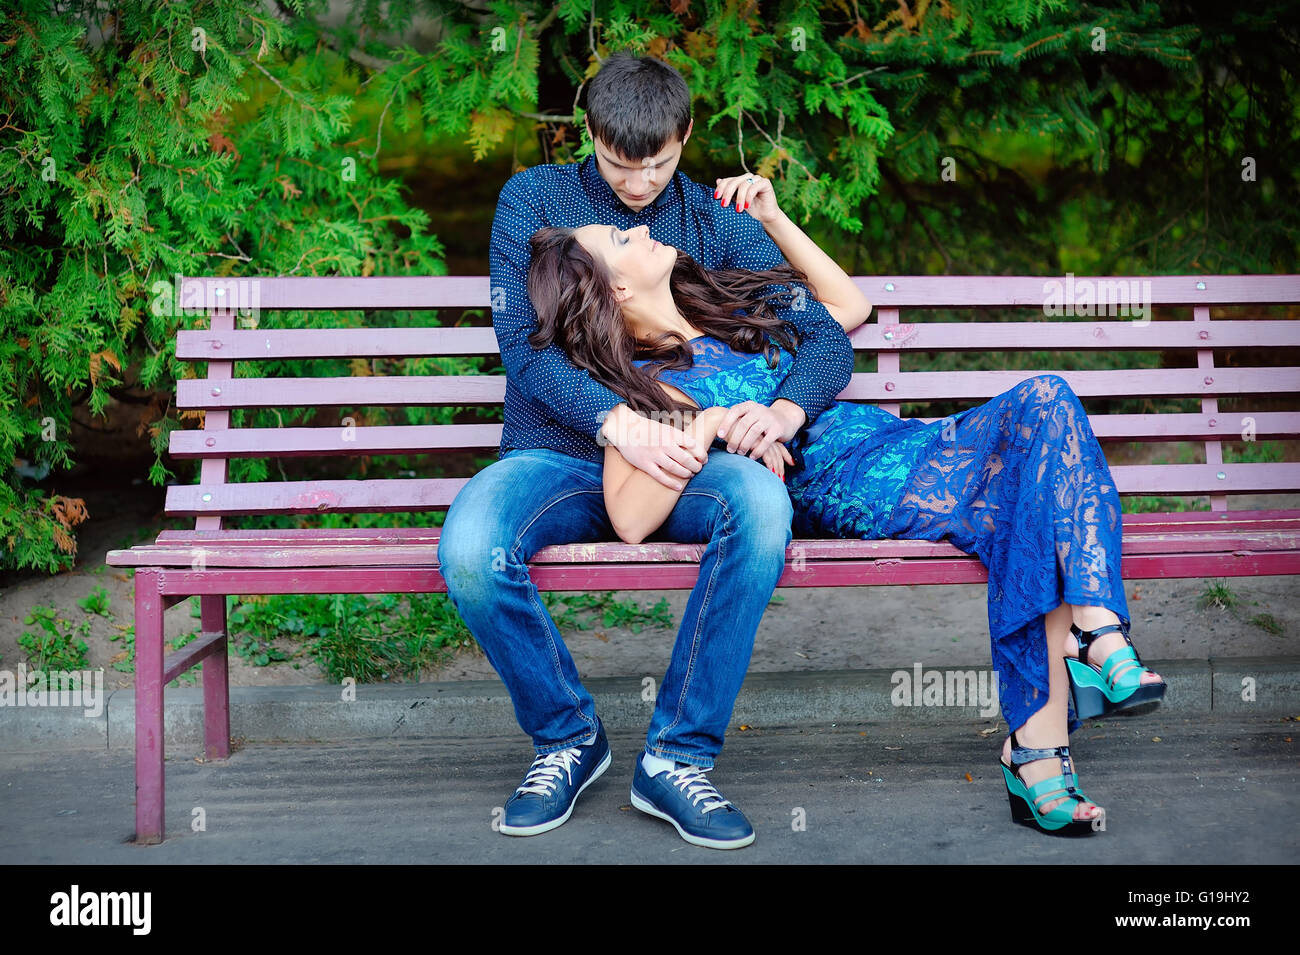 man and woman on a bench Stock Photo